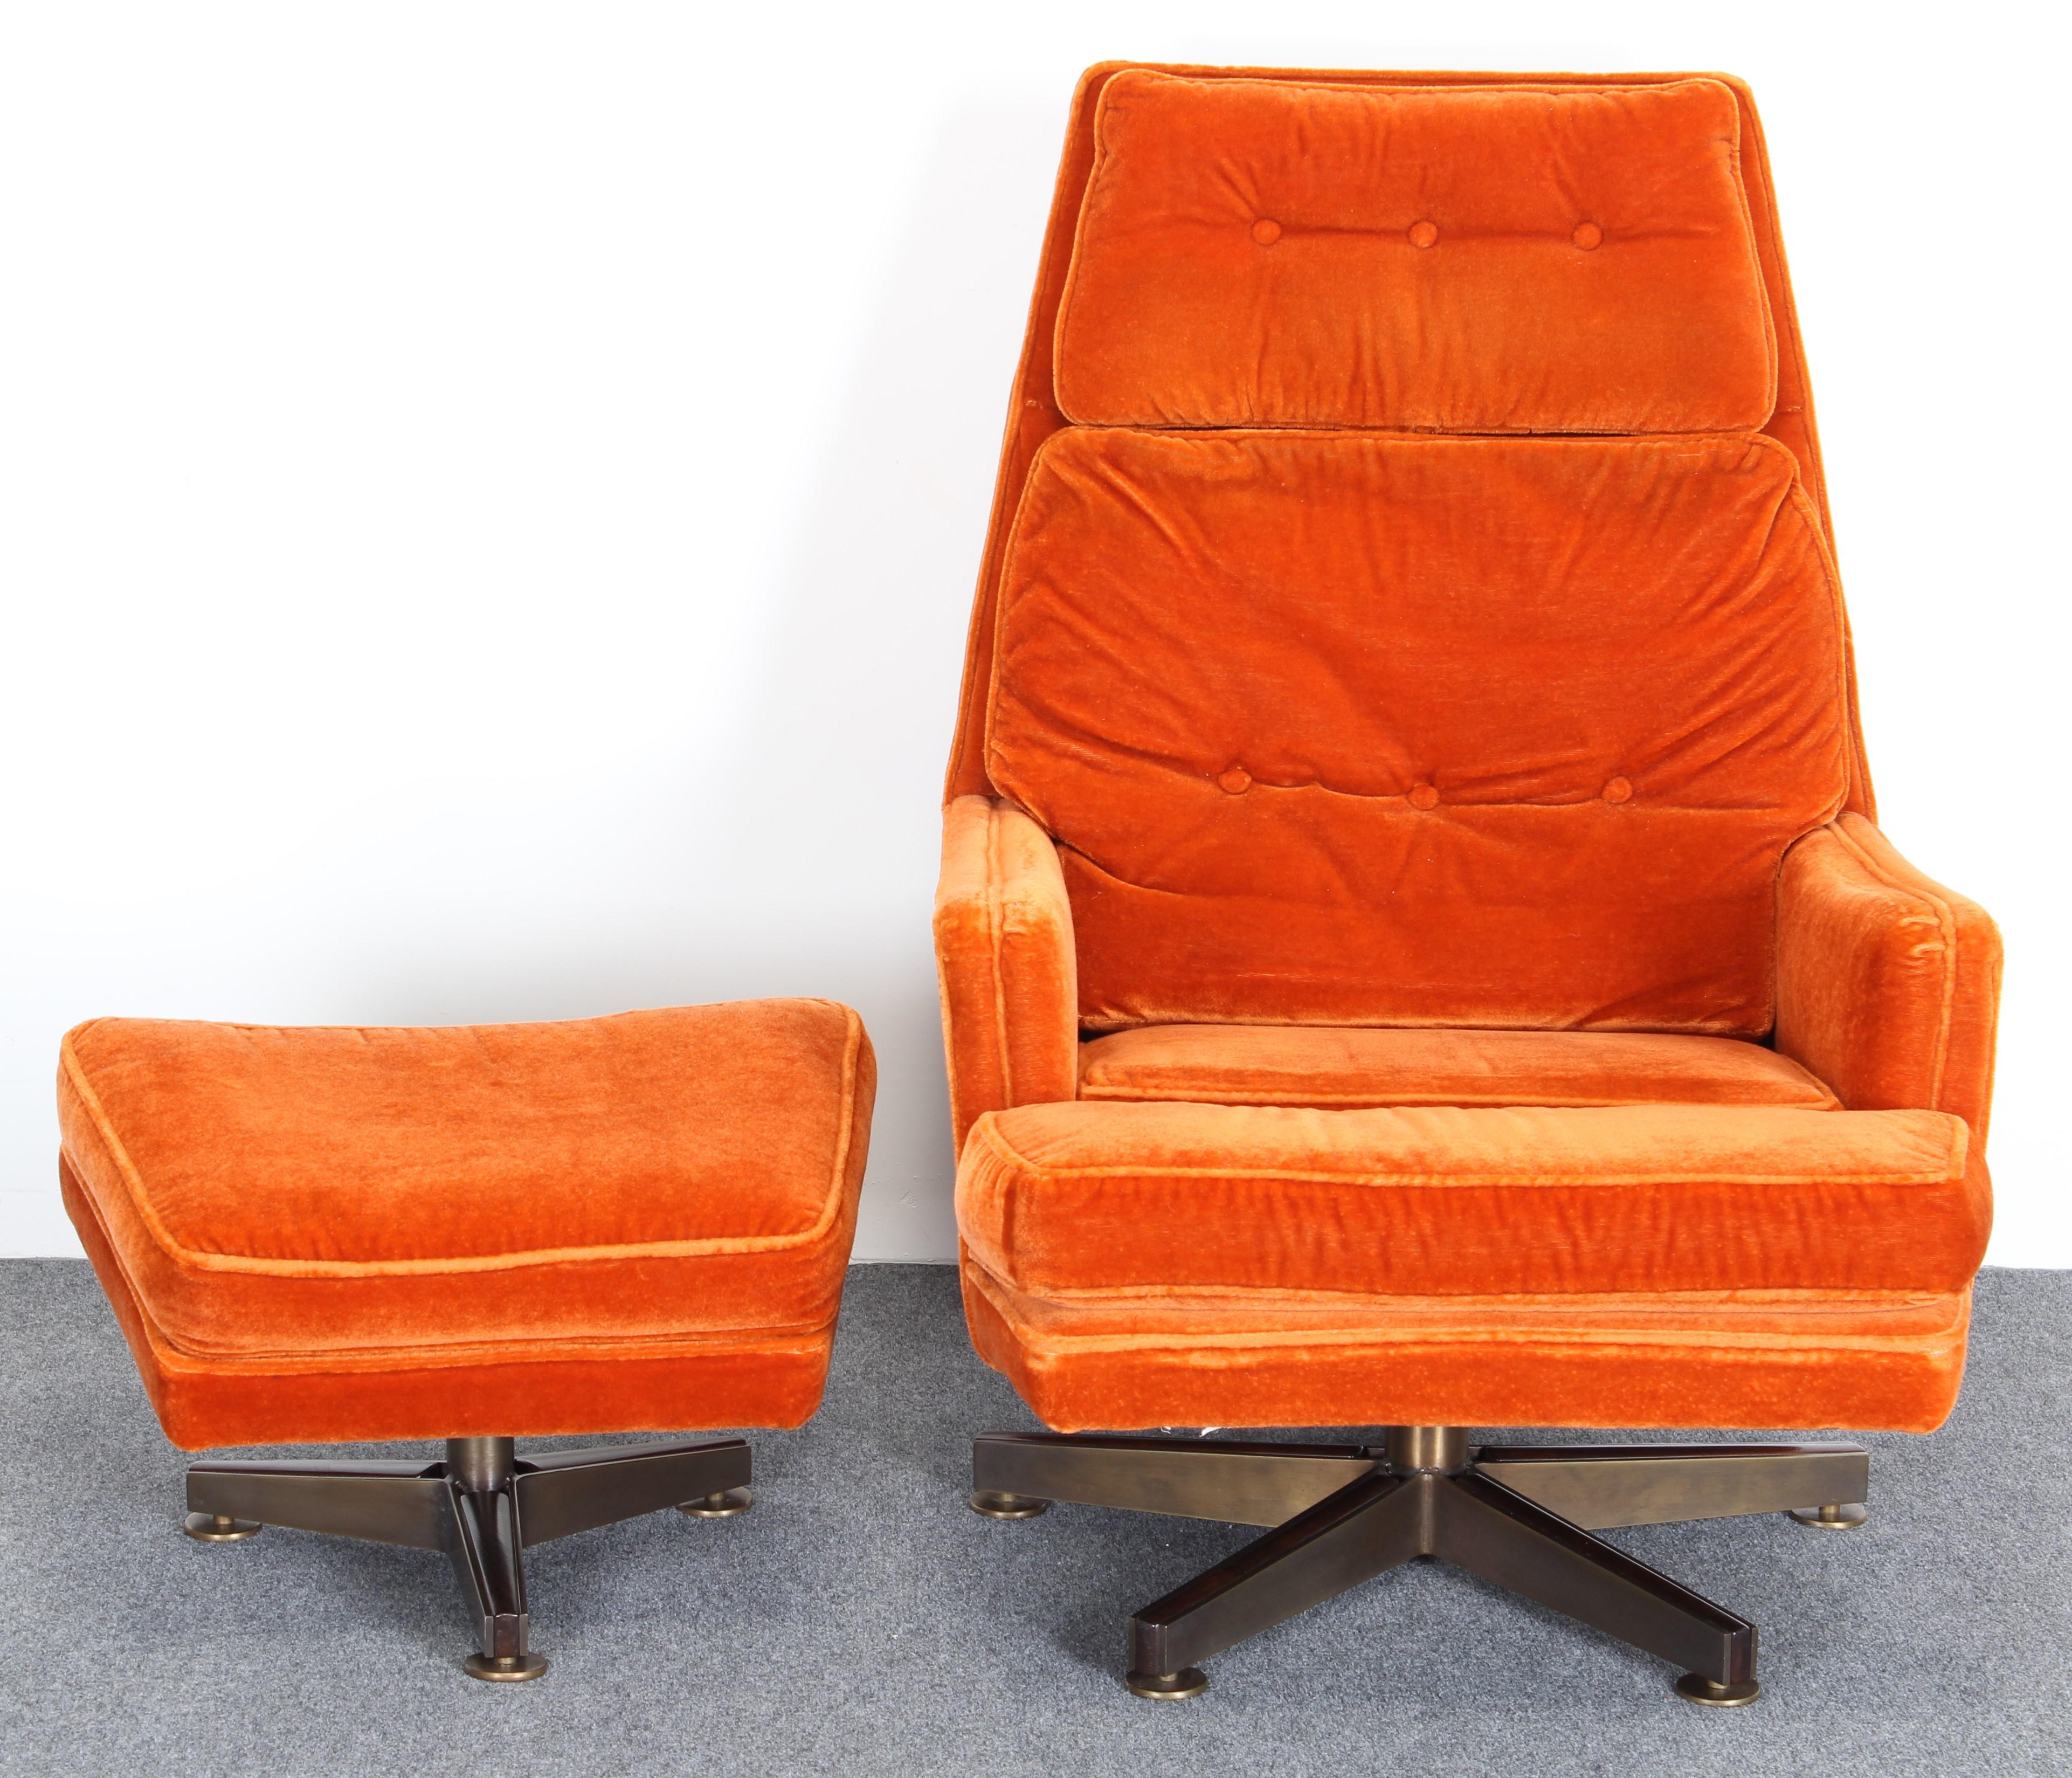 A comfortable and stylish Edward Wormley swivel lounge chair and ottoman for Dunbar, 1960. The chair and the ottoman have tripod swivel bronze and rosewood bases. The fabric is original and has some age-appropriate wear on arms as shown in the